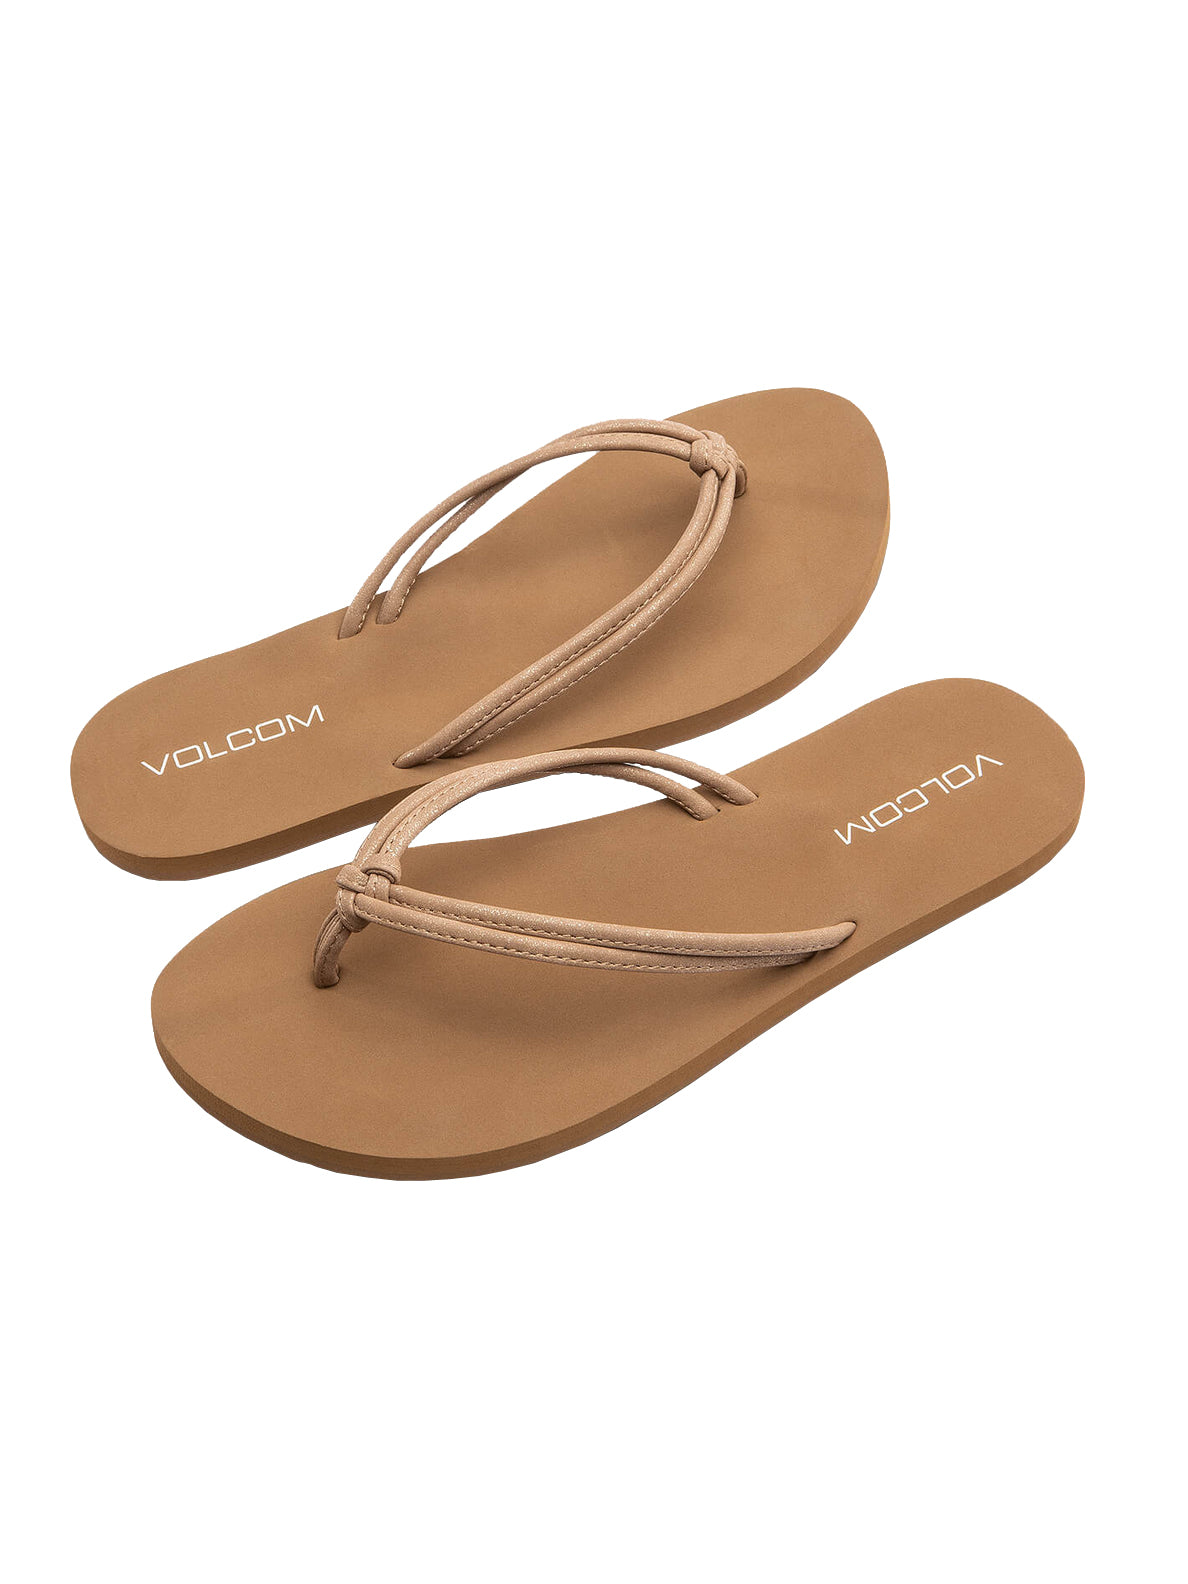 Volcom Forever and Ever 2 Womens Sandal TAN-Tan 8